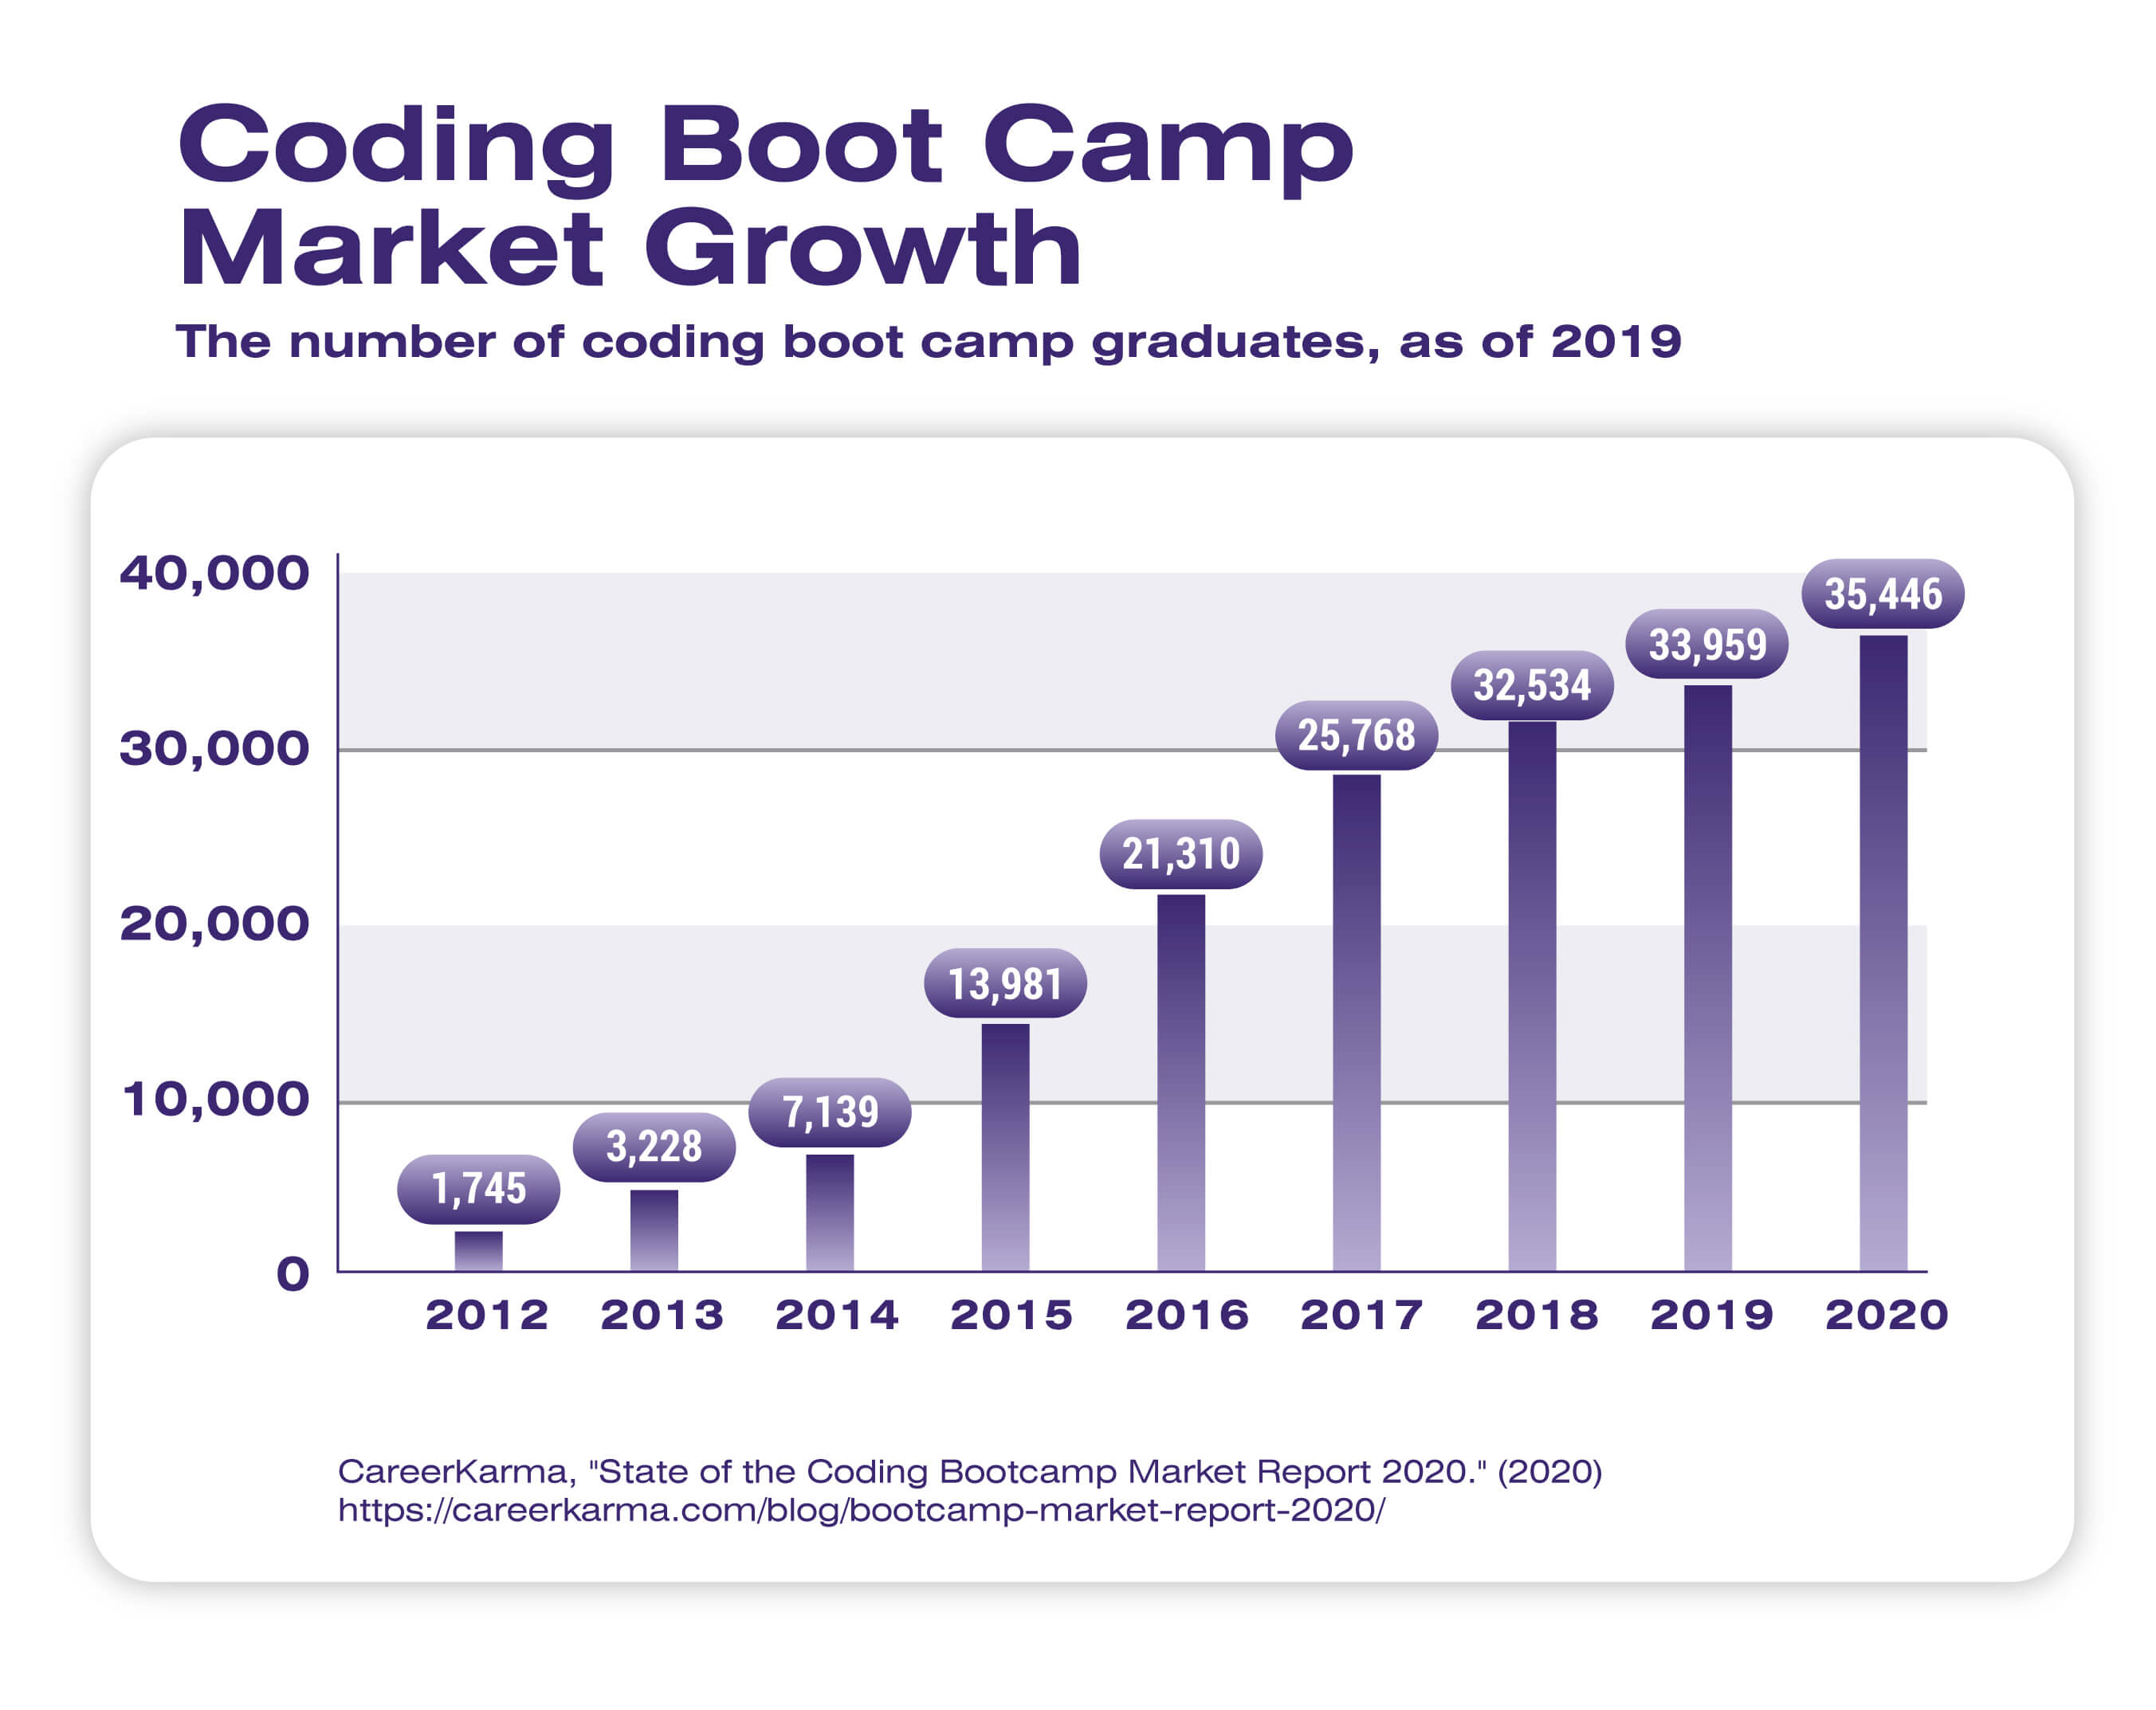 Chart showing the number of coding bootcamp graduates